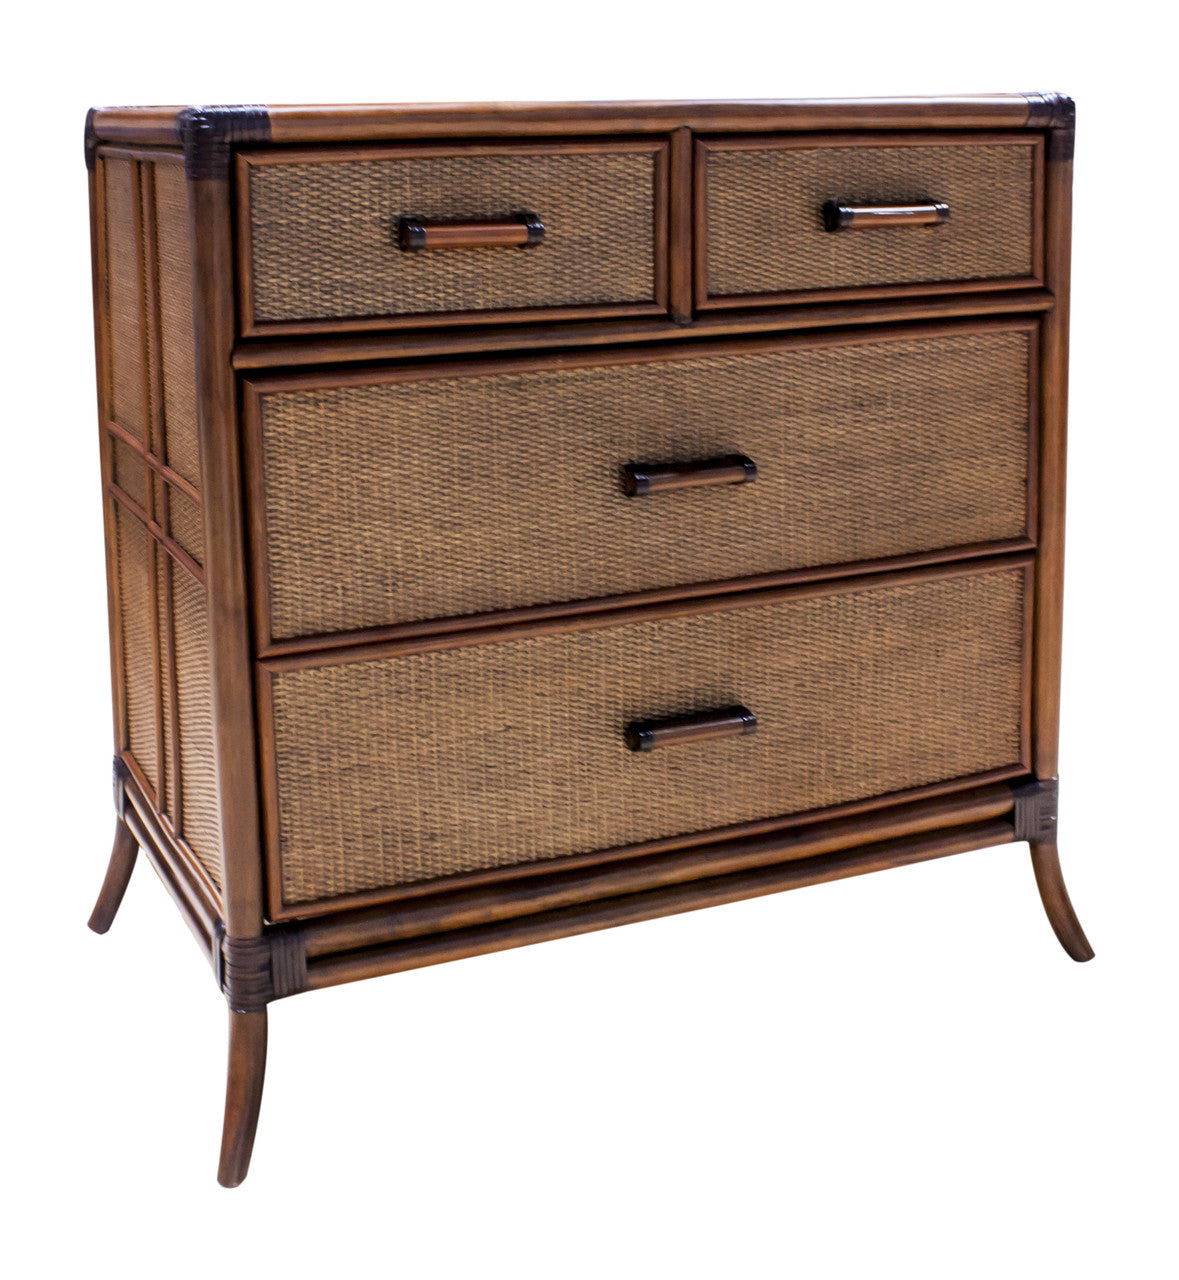 Hospitality Rattan Palm Cove Four Drawer Split Chest With Glass